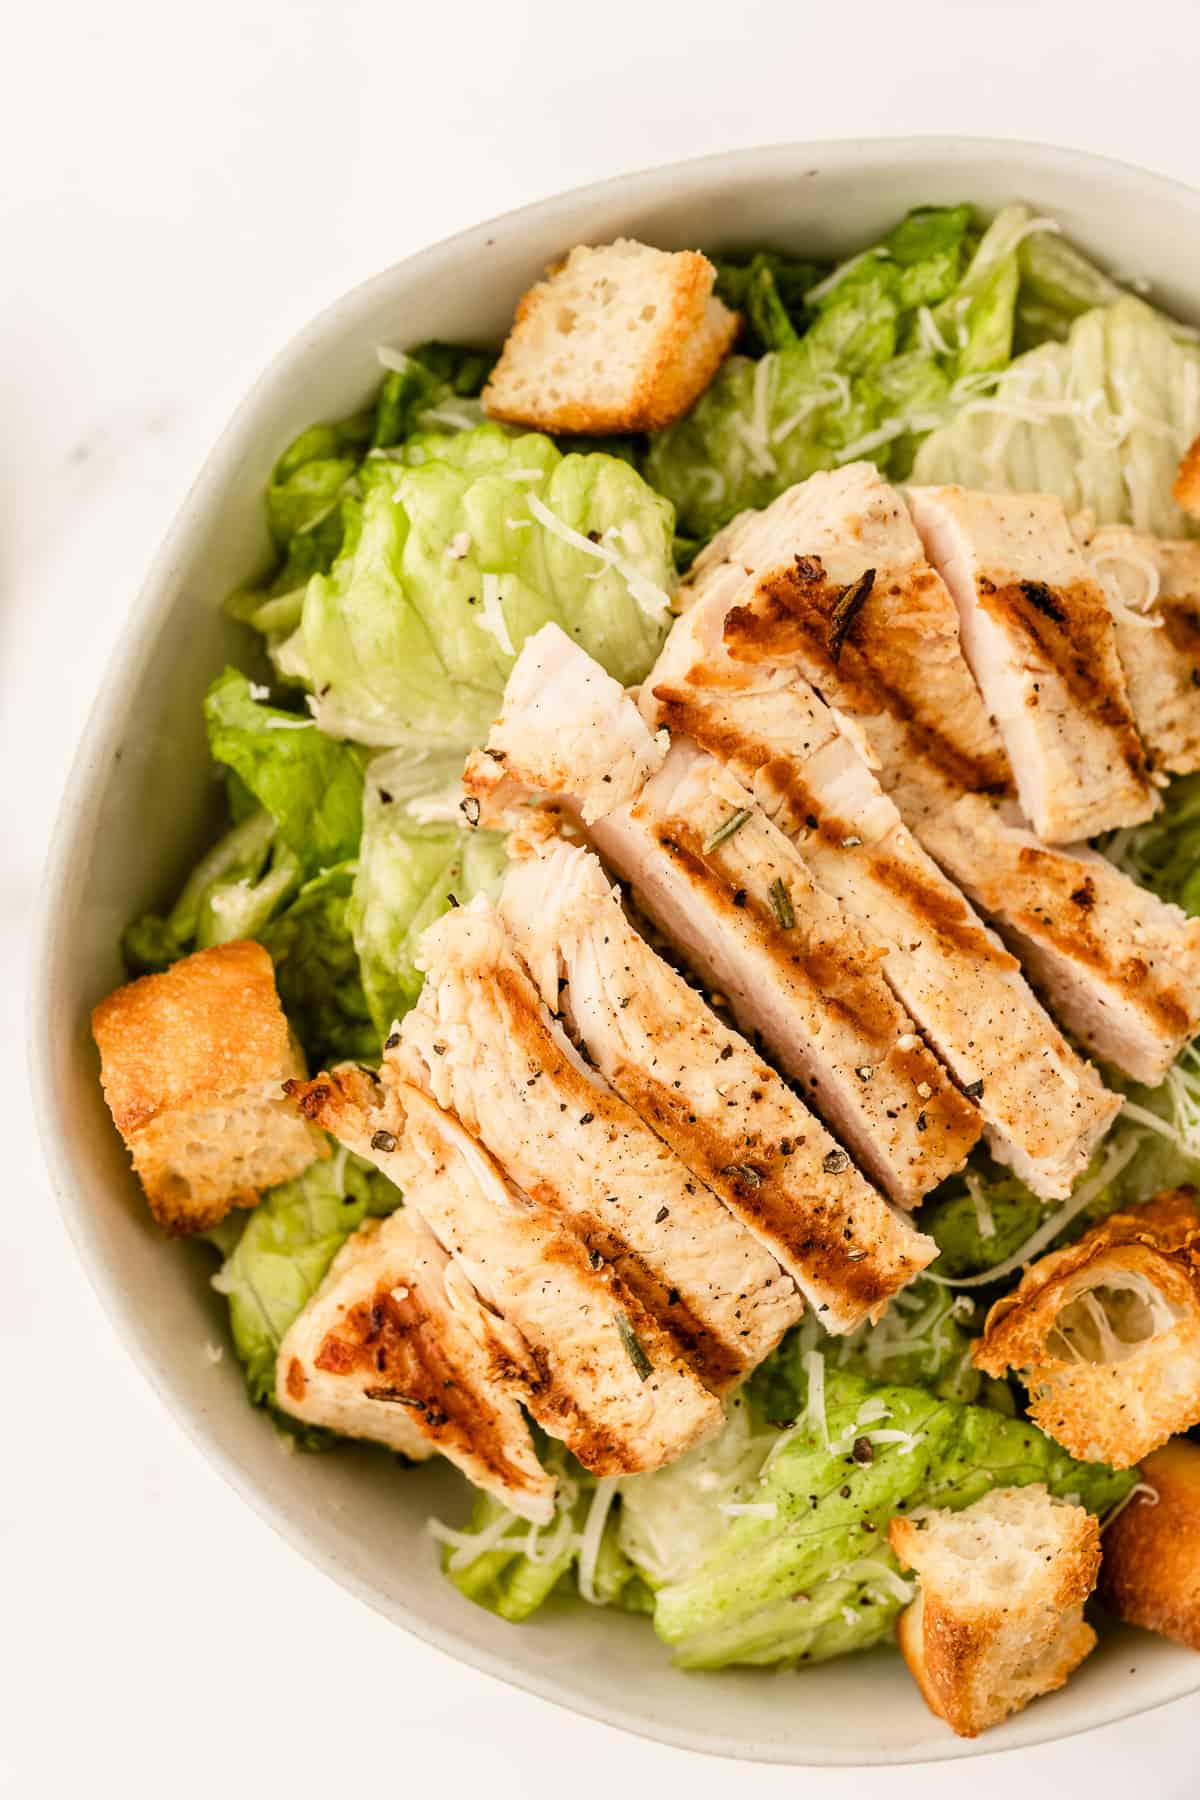 A salad with chicken and croutons in it.